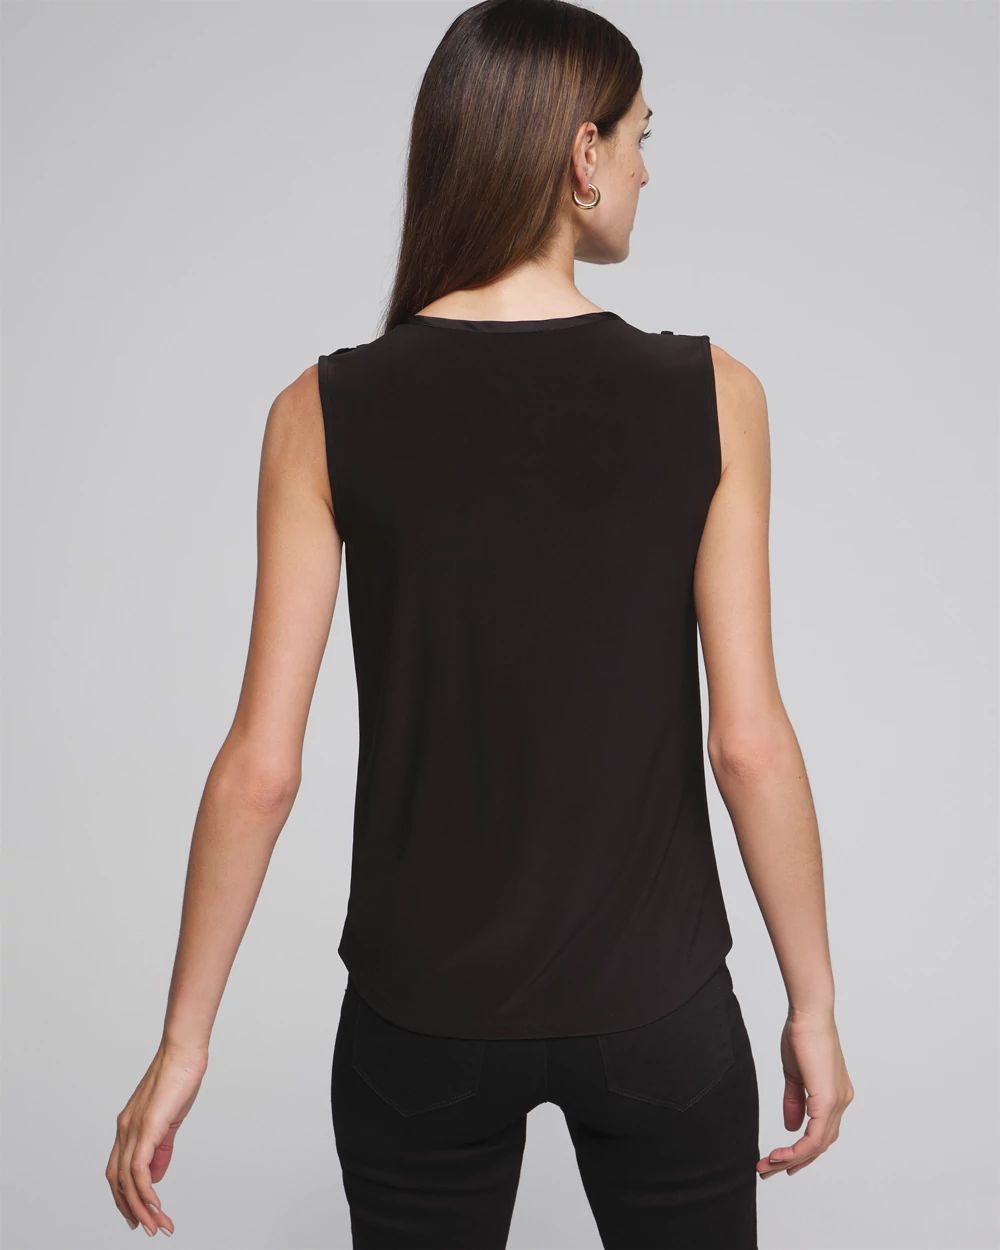 Outlet WHBM Utility Tank click to view larger image.